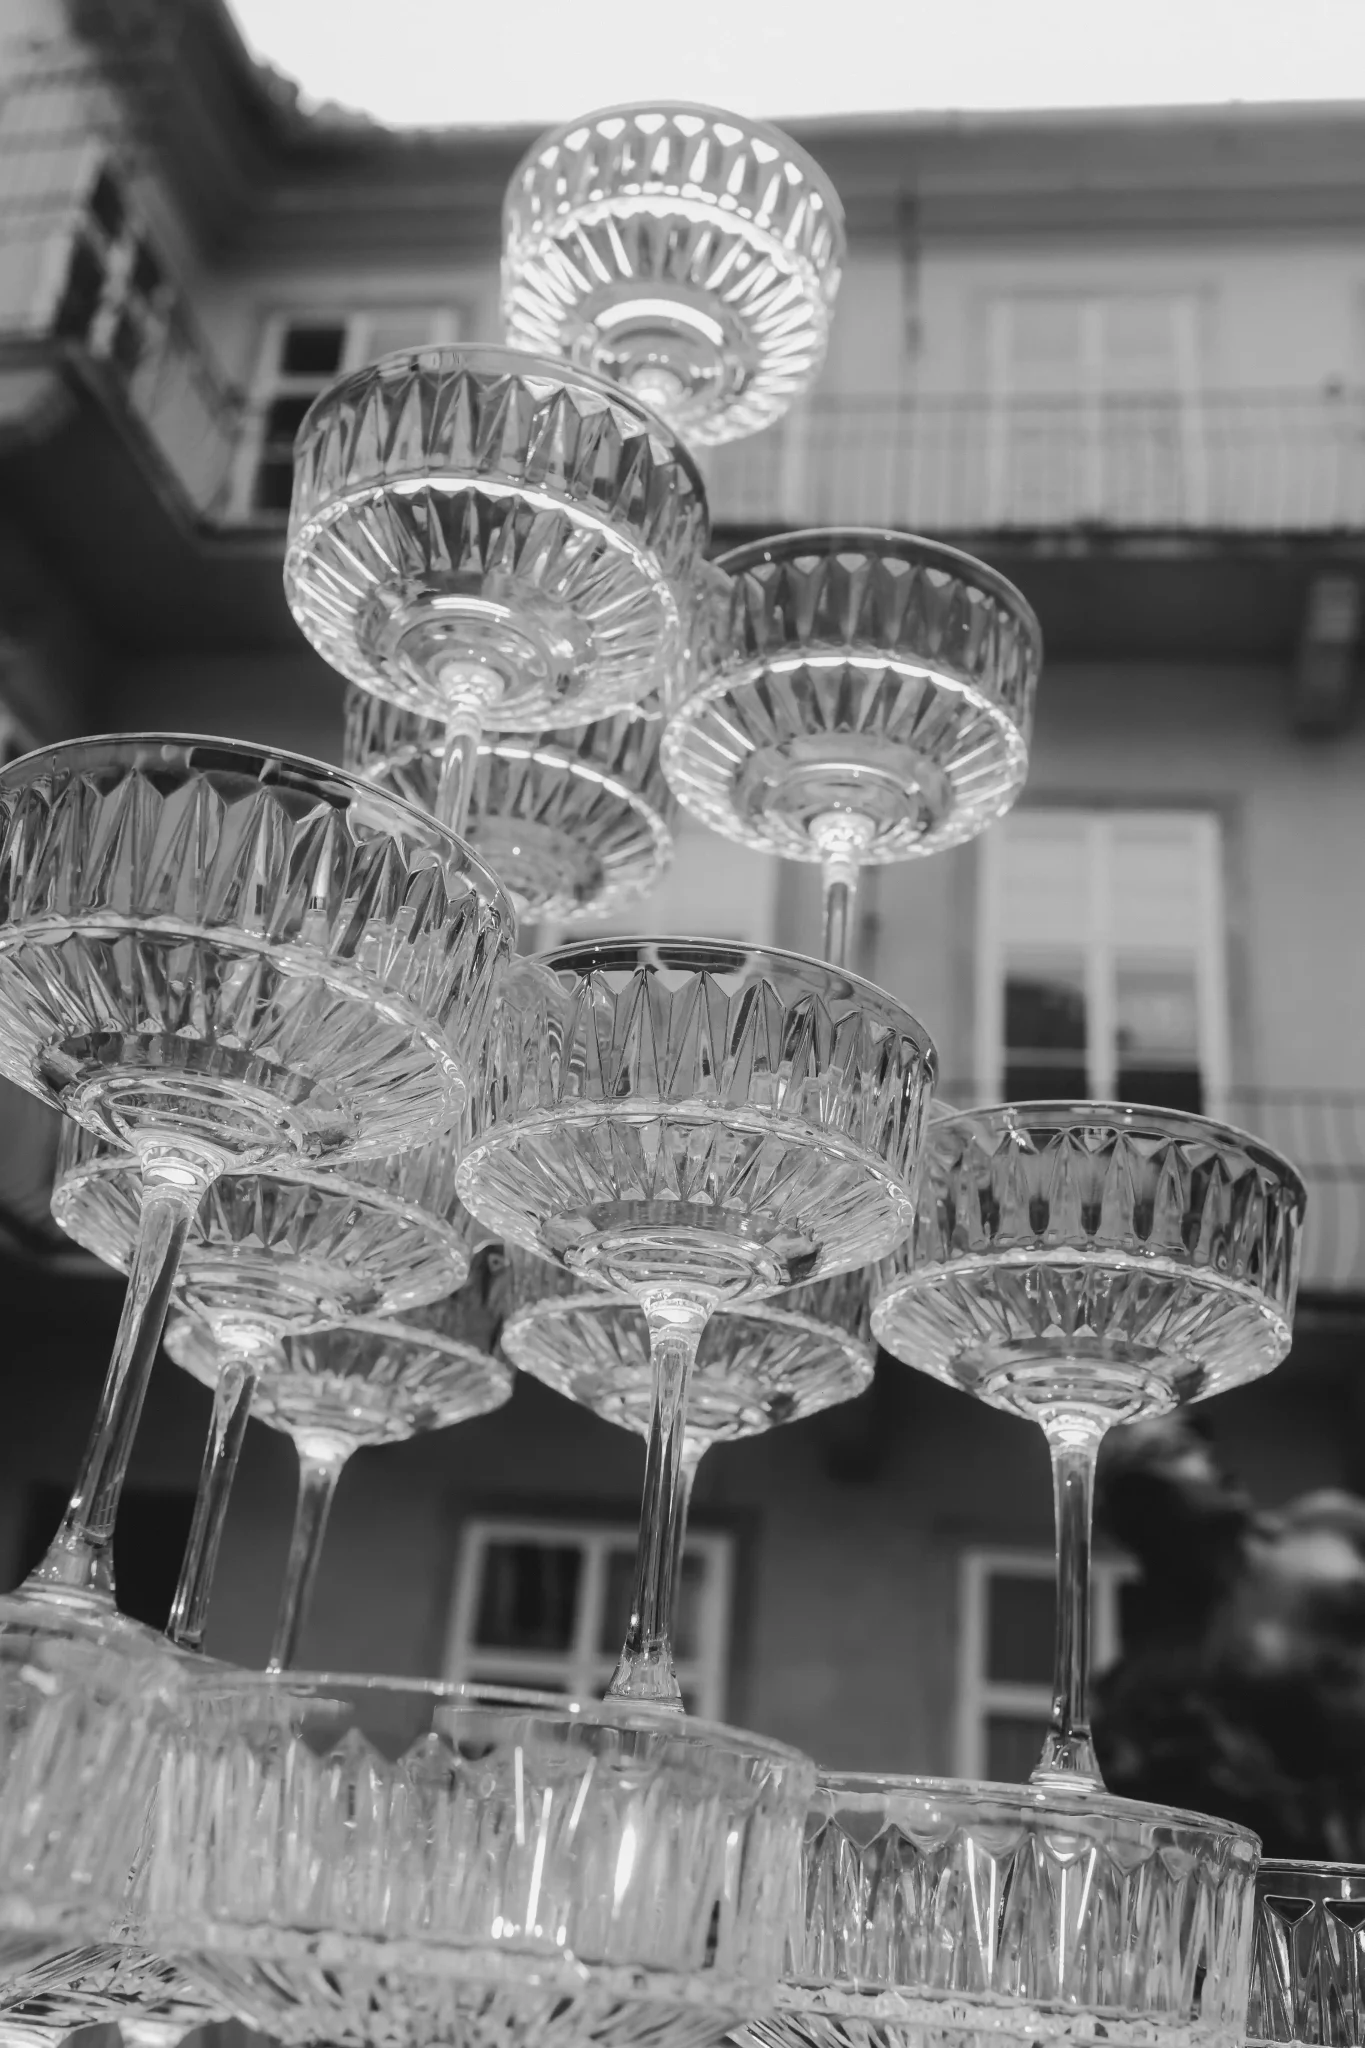 A stack of wine glasses on a table in front of a building.